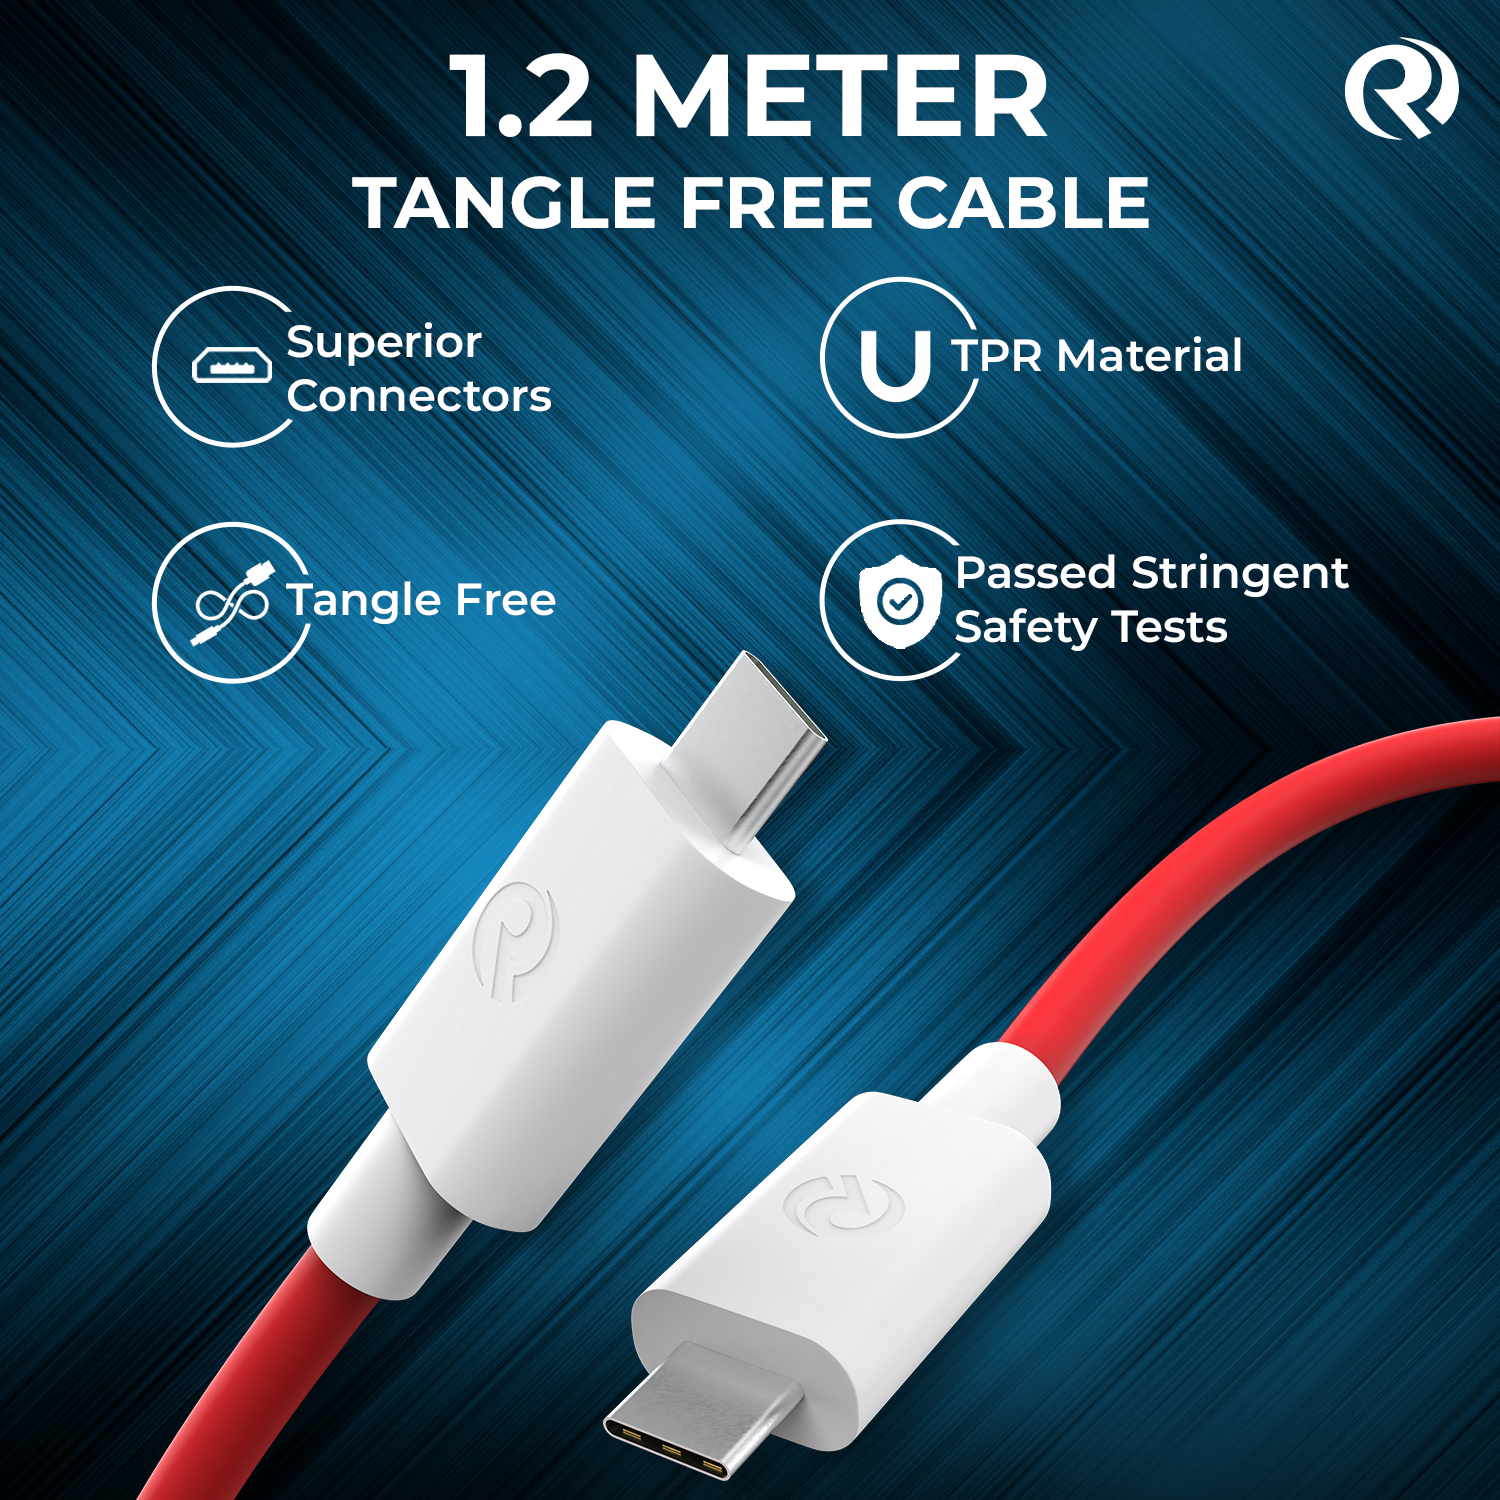 ROBOTEK DC121 Type-C to Type-C Fast Charging Cable | Type C Fast Charging | USB-C Cable With Power Delivery | 60W/3A PD Fast Charging Cable & 480Mbps Data Sync | Compatible with Smartphones, Tablets, Laptops & other Type-C devices (Type C to Type C) Red